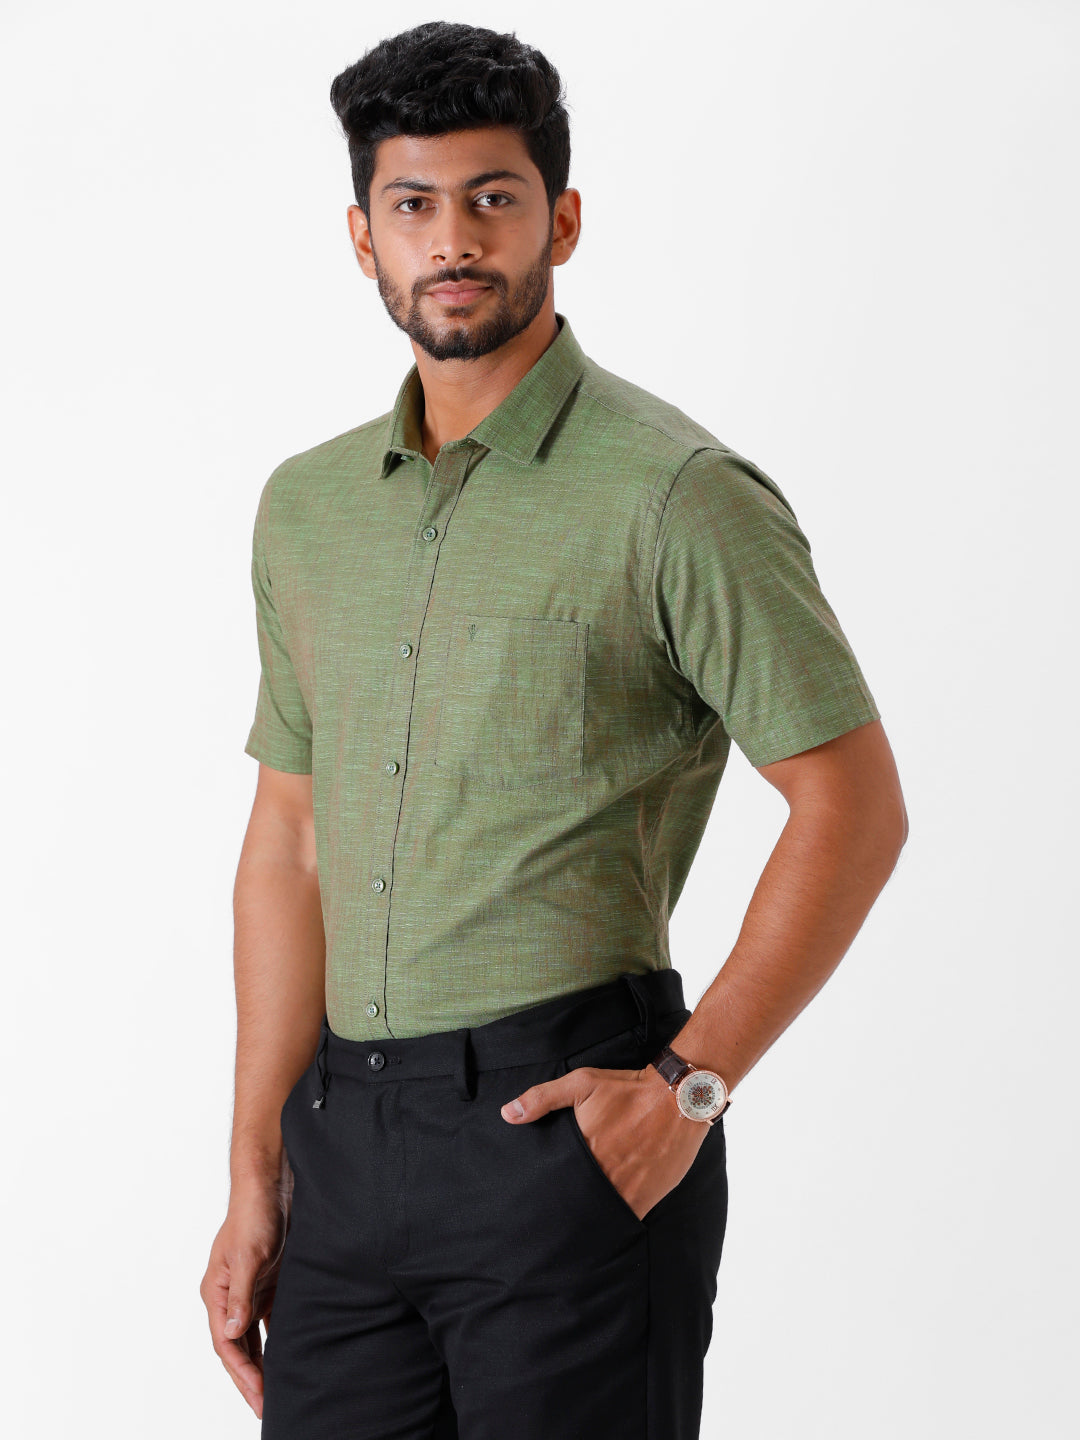 Mens Formal Shirt Half Sleeves Green CL2 GT19-Side view